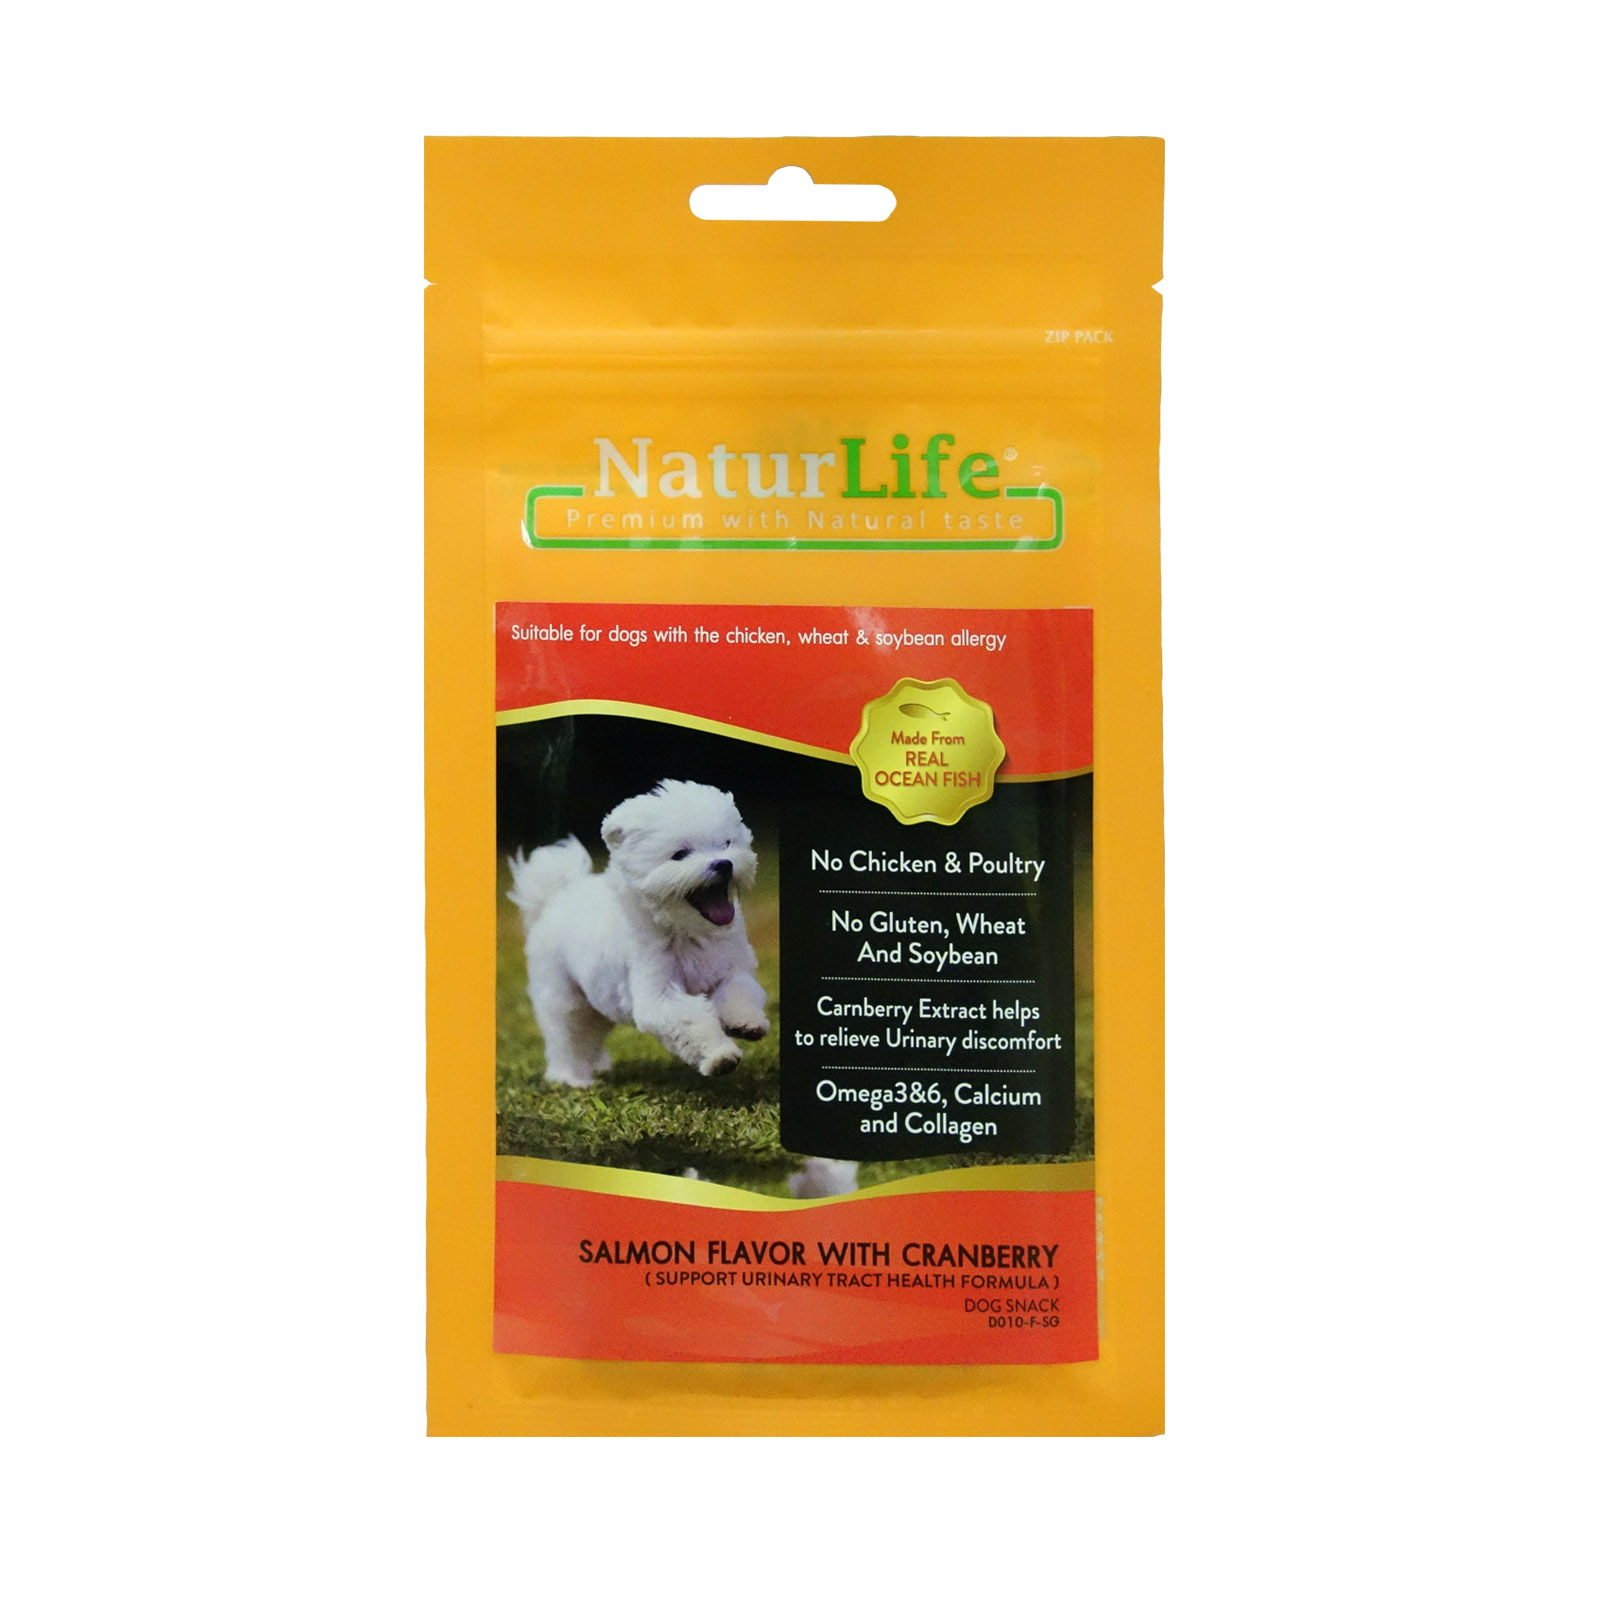 Naturlife Dog Snack Smoked Salmon Flavor with Cranberry Dog Treat